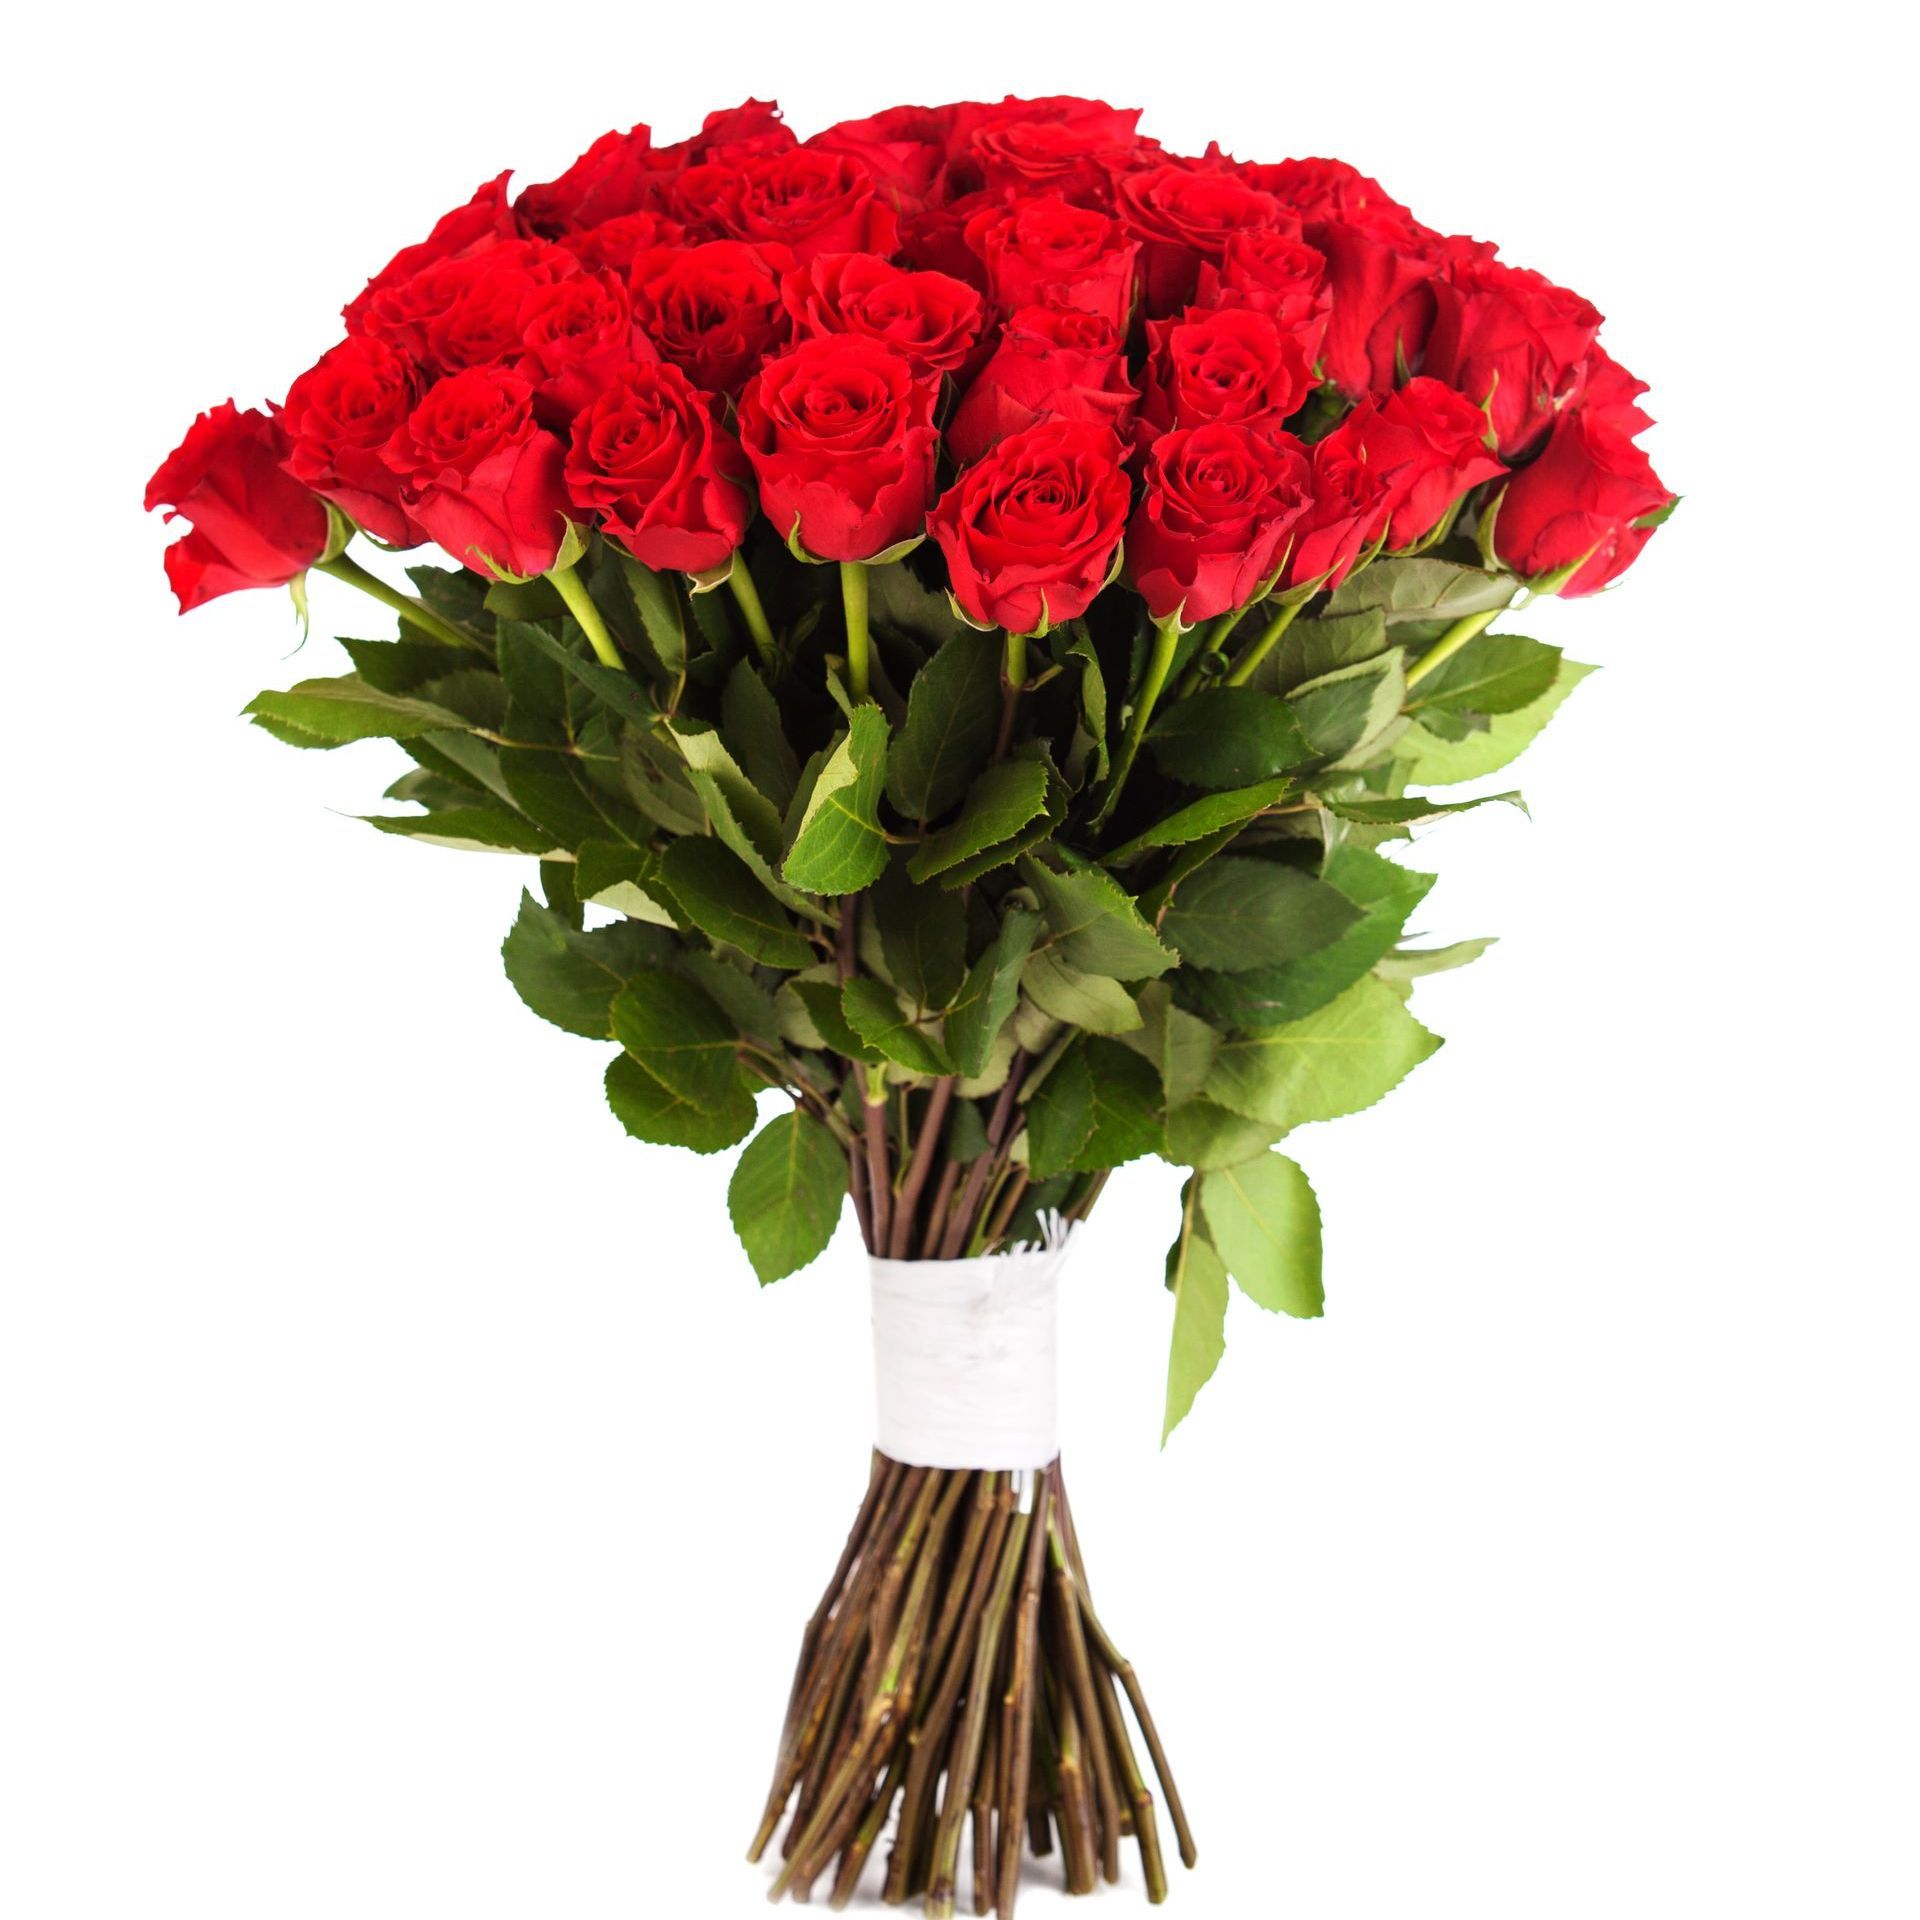 a large bouquet of red roses is tied with a white ribbon